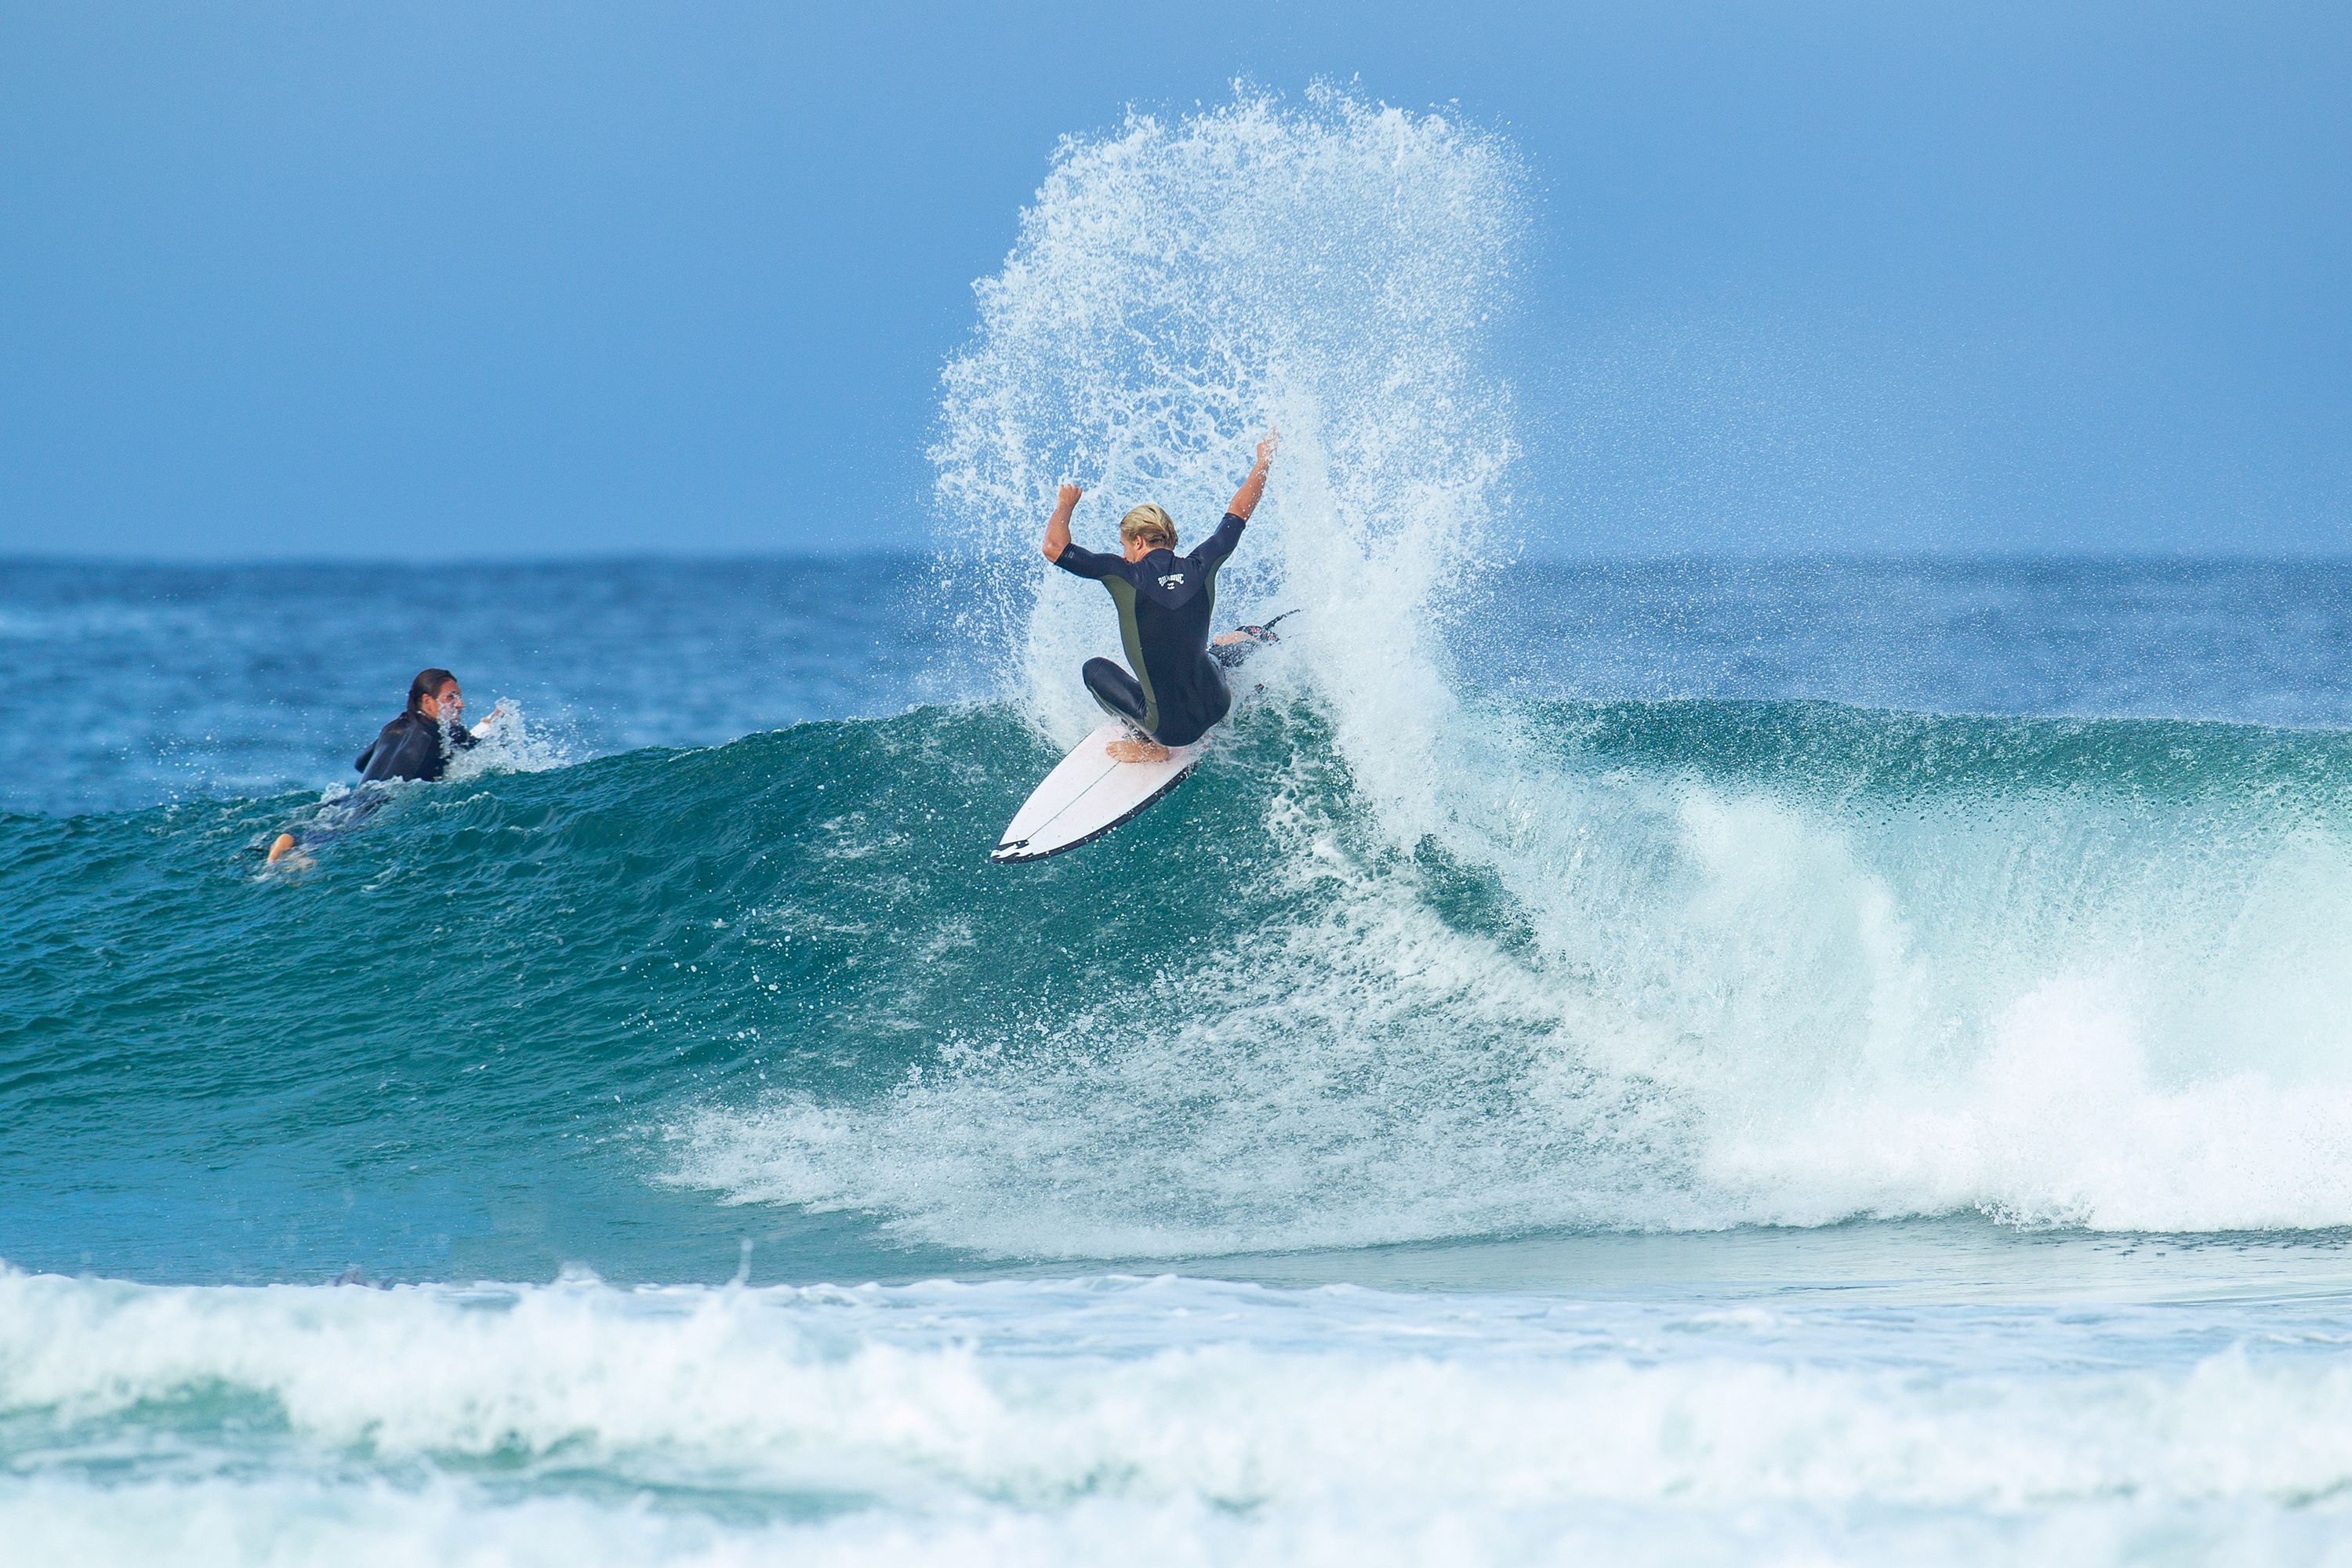 Bells Beach Pro 2022: Aussie surfer Ethan Ewing aims for first World Surfing League victory in honor of his late mother